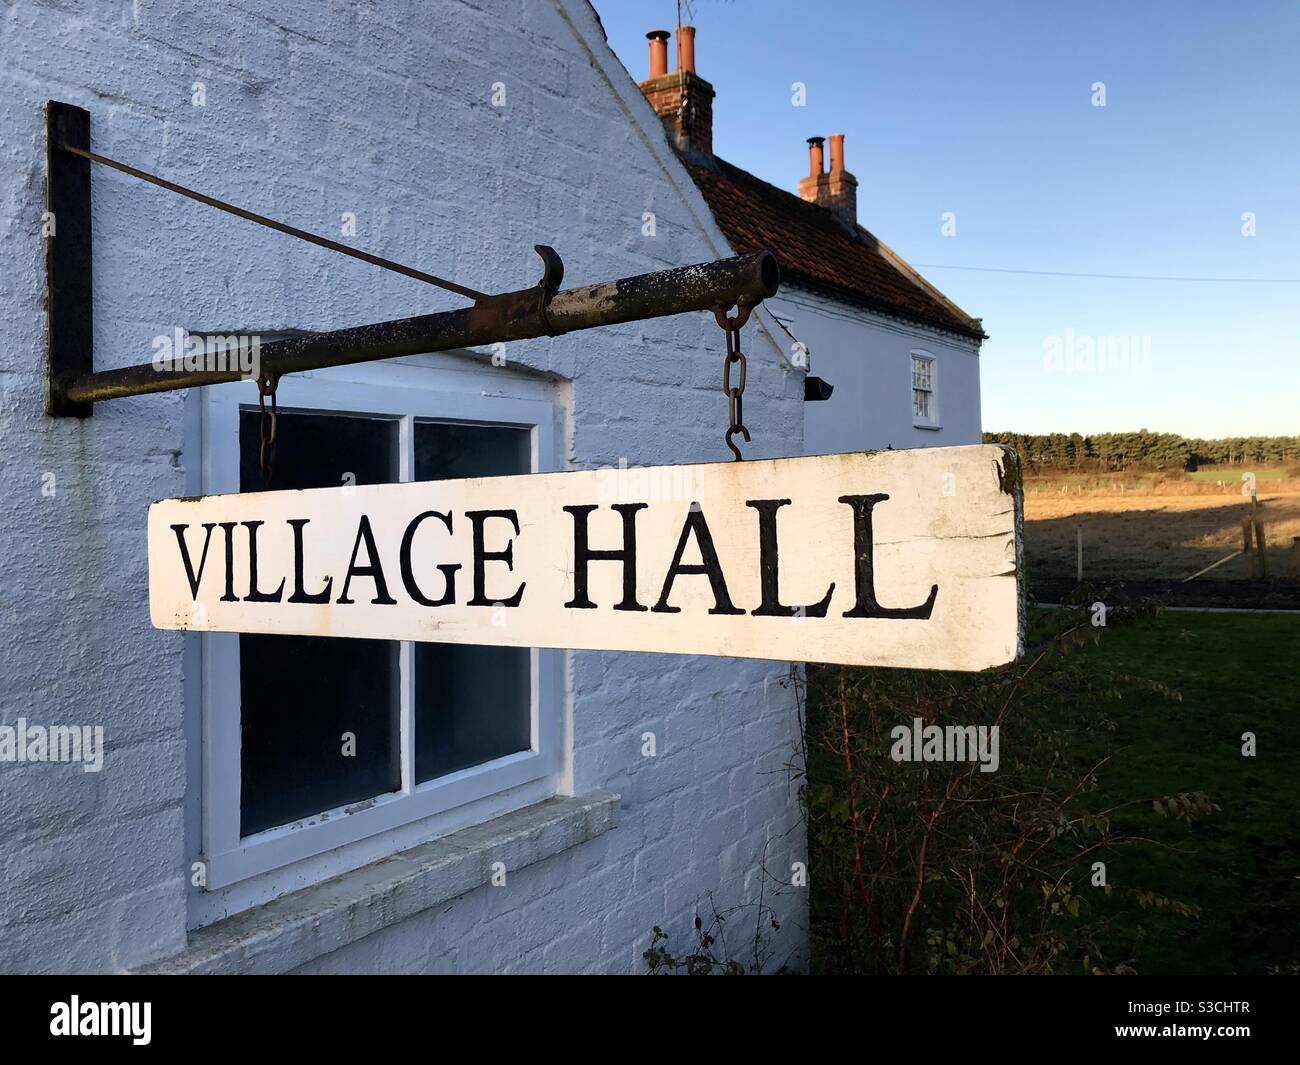 A local village hall sign in a small countryside community Stock Photo